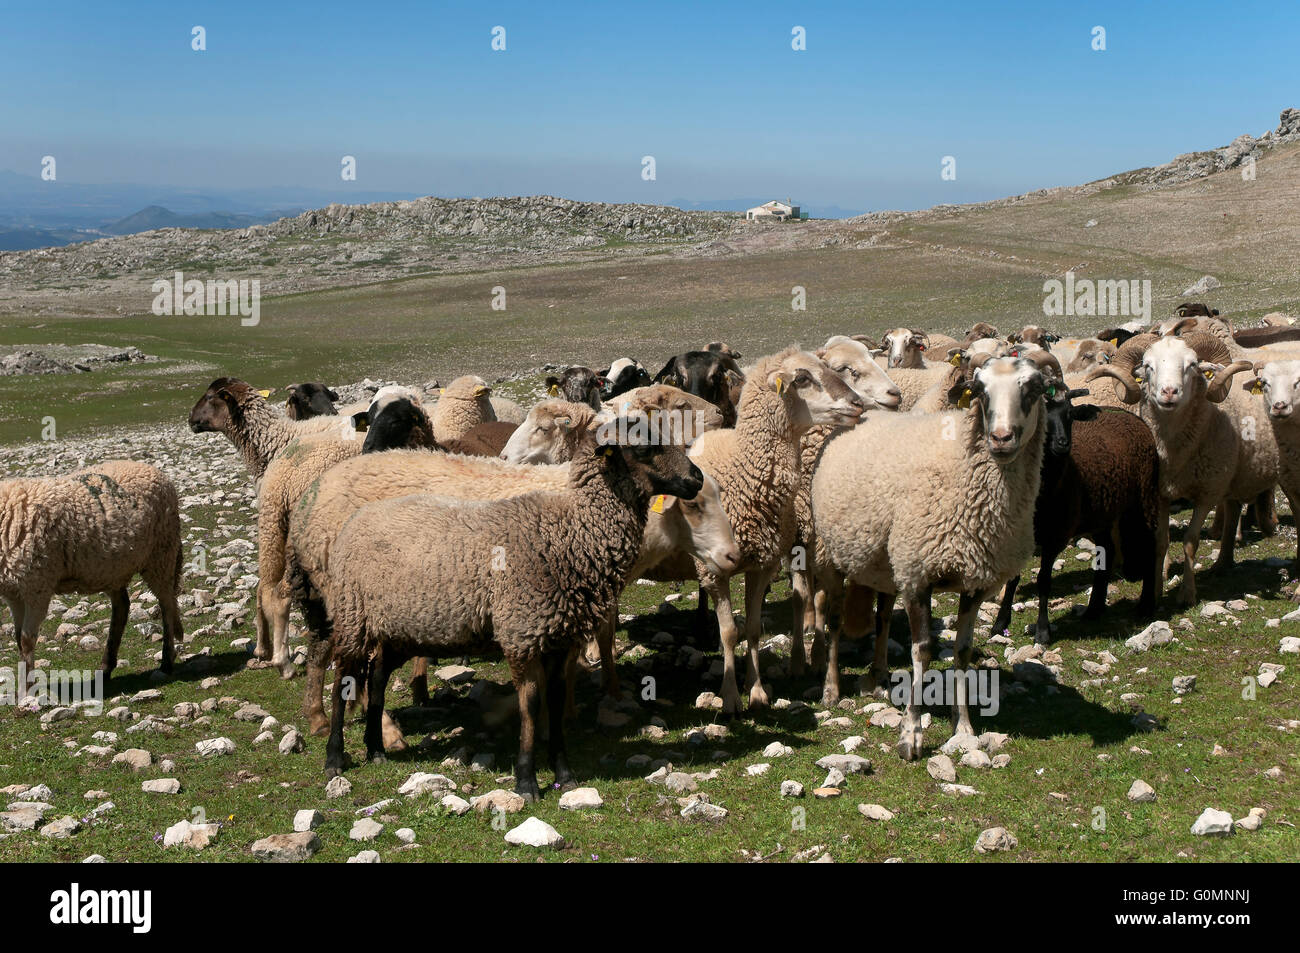 Sheep of the breed Lojeña, Loja mountains, Granada province, Region of Andalusia, Spain, Europe Stock Photo